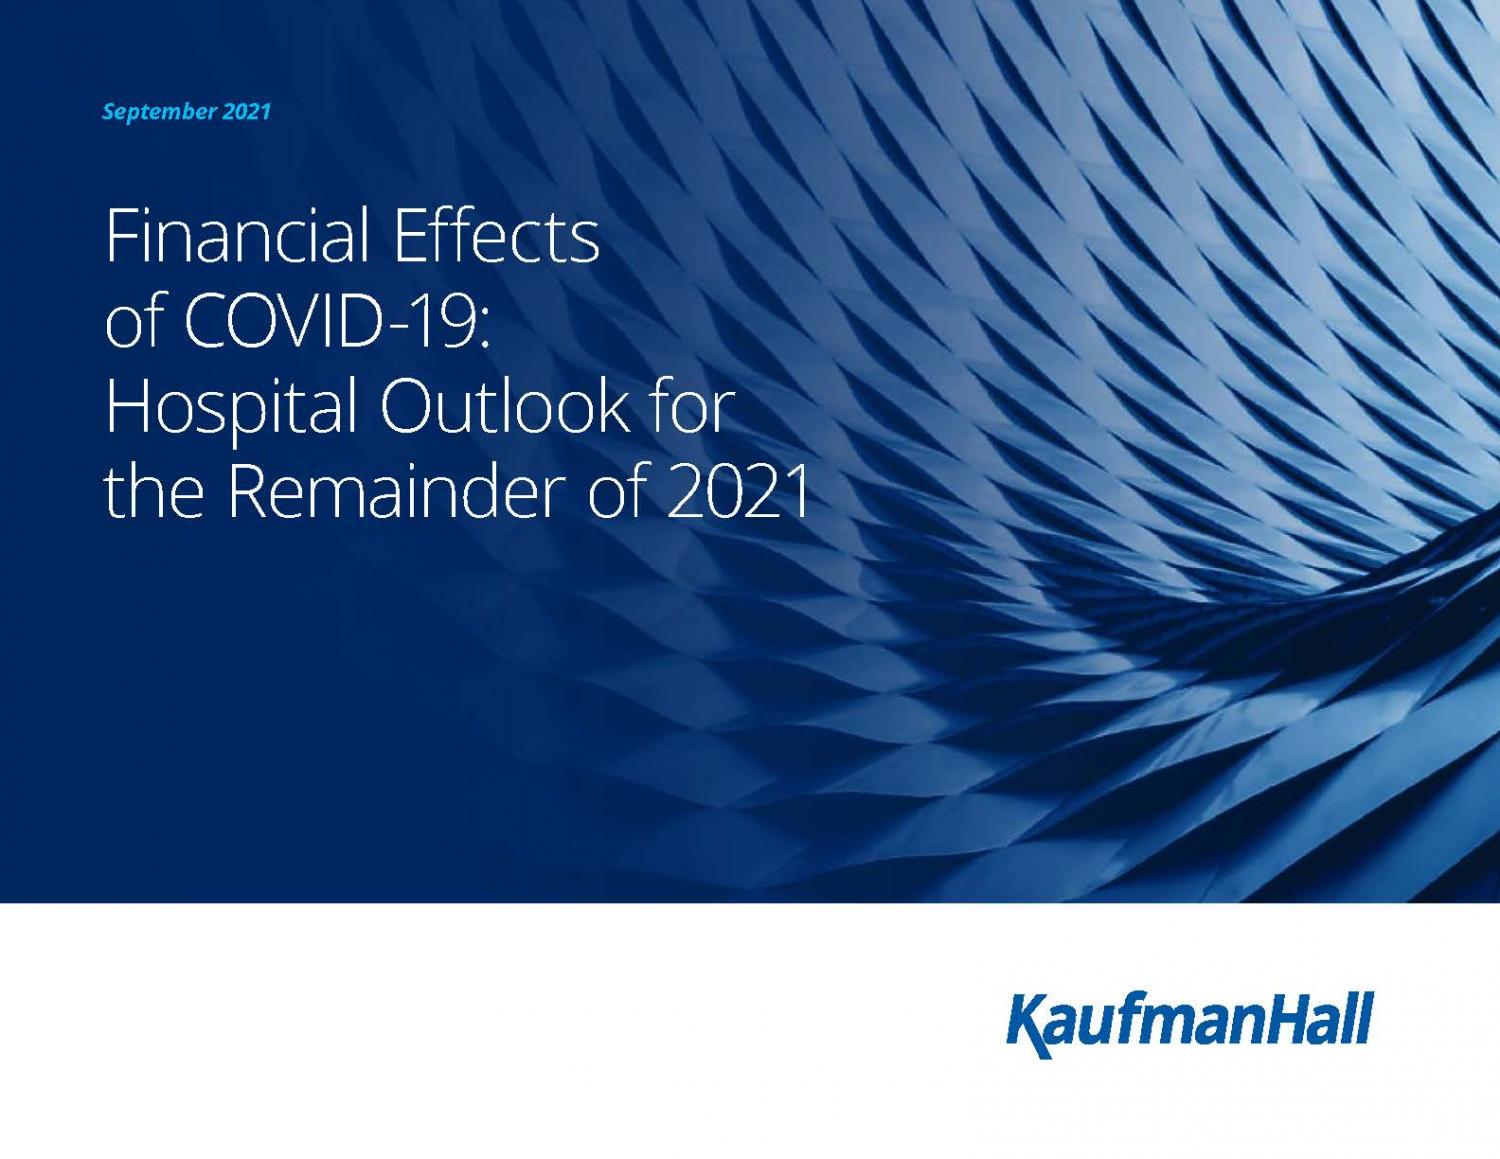 Financial Effects of COVID-19: Hospital Outlook for the Remainder of 2021. September 2021. KaufmanHall.